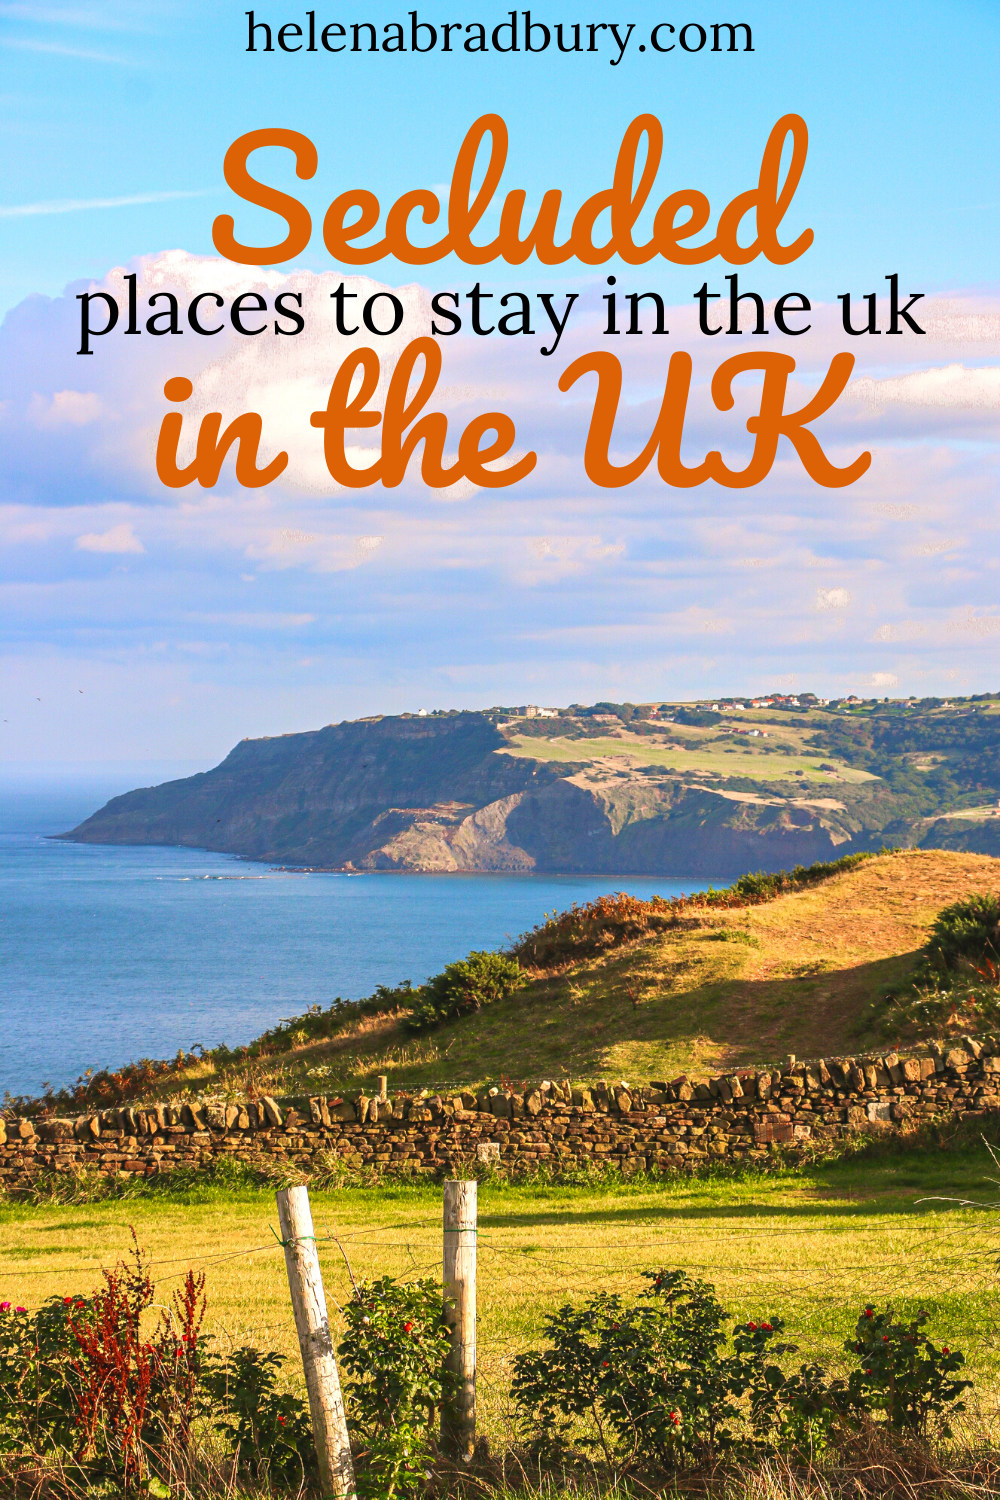 6 Unique places to stay for secluded UK getaways 